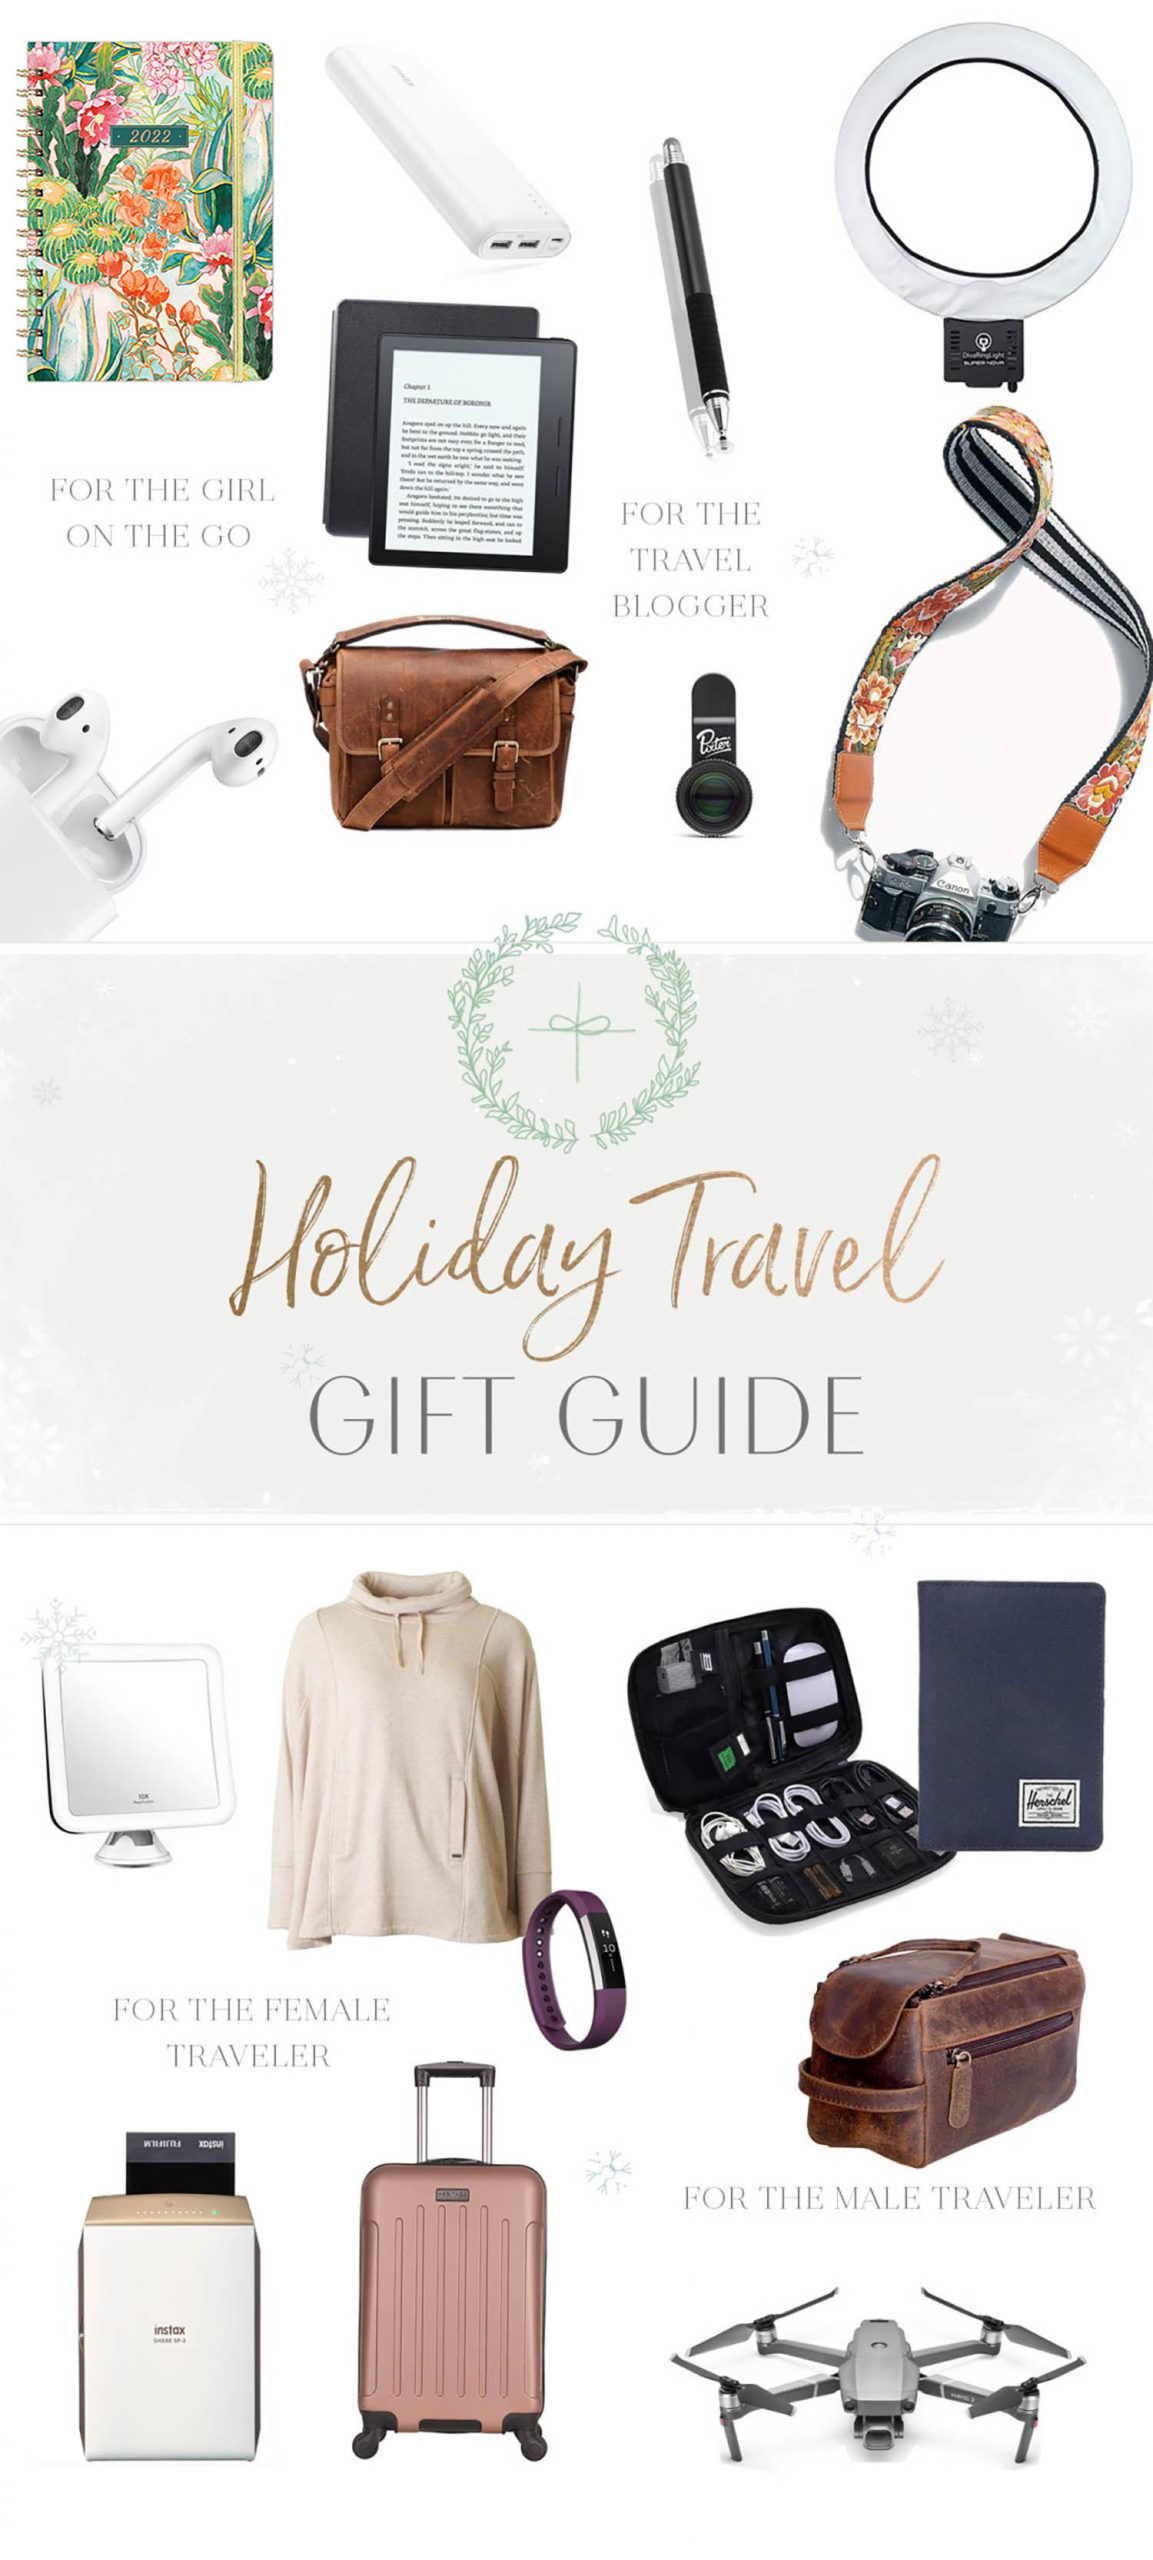 2022 Holiday Gift Guide for Her - Inspiralized